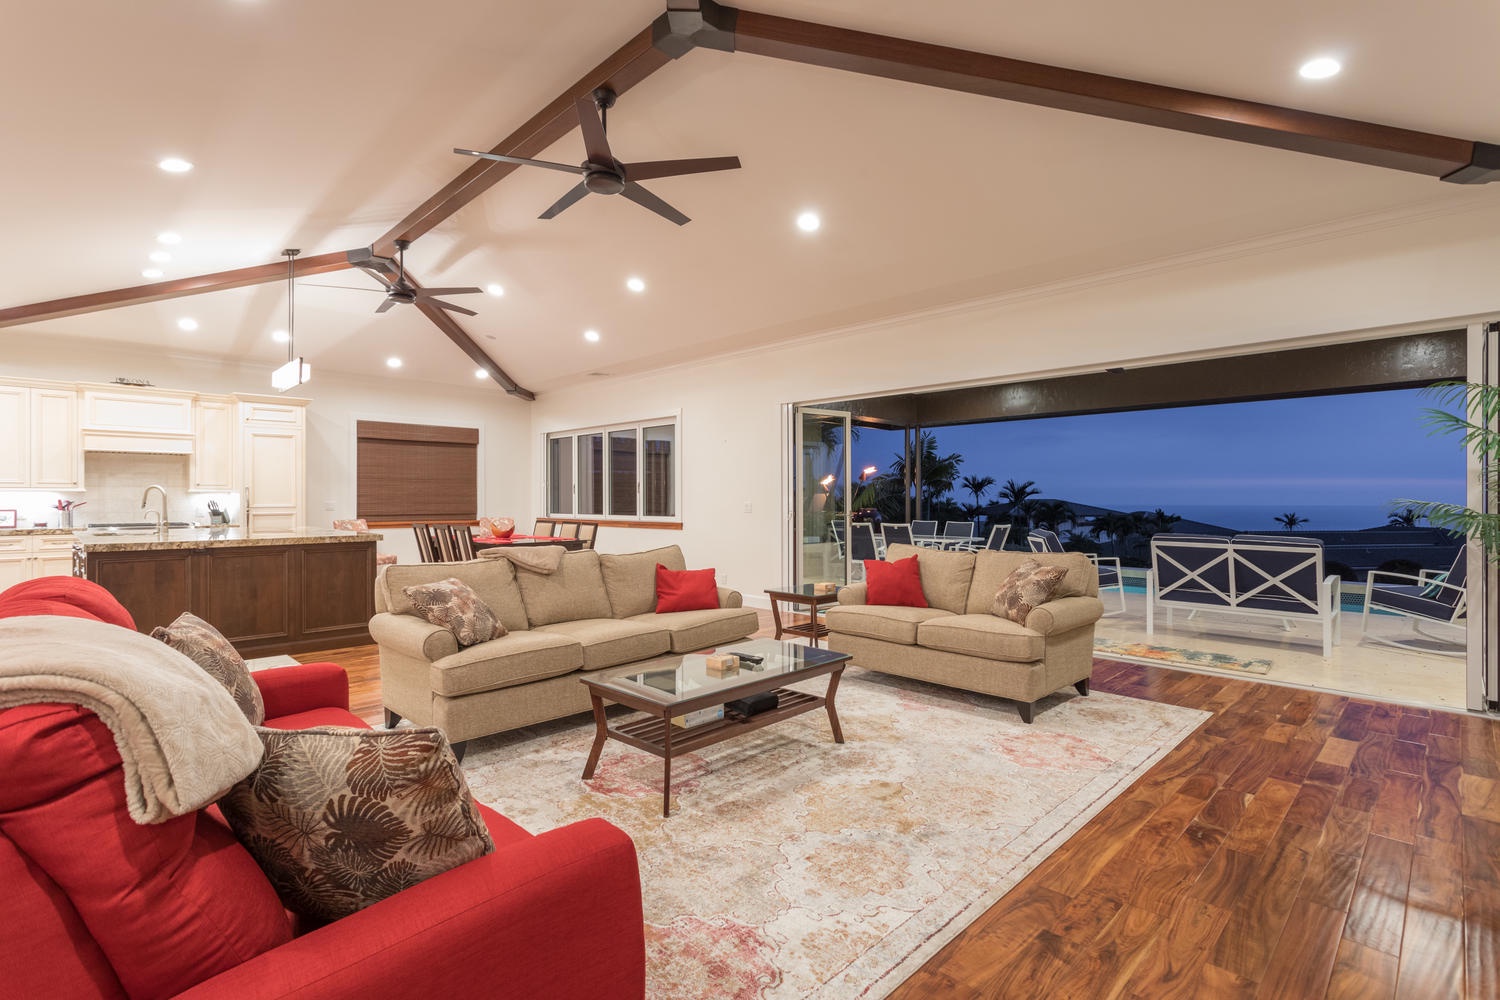 Kailua Kona Vacation Rentals, Ohana le'ale'a - As you enter, you'll be greeted by the open floor plan with 12-14ft vaulted ceilings, a modern updated design, and beautiful hardwood floors with natural travertine stone throughout the home